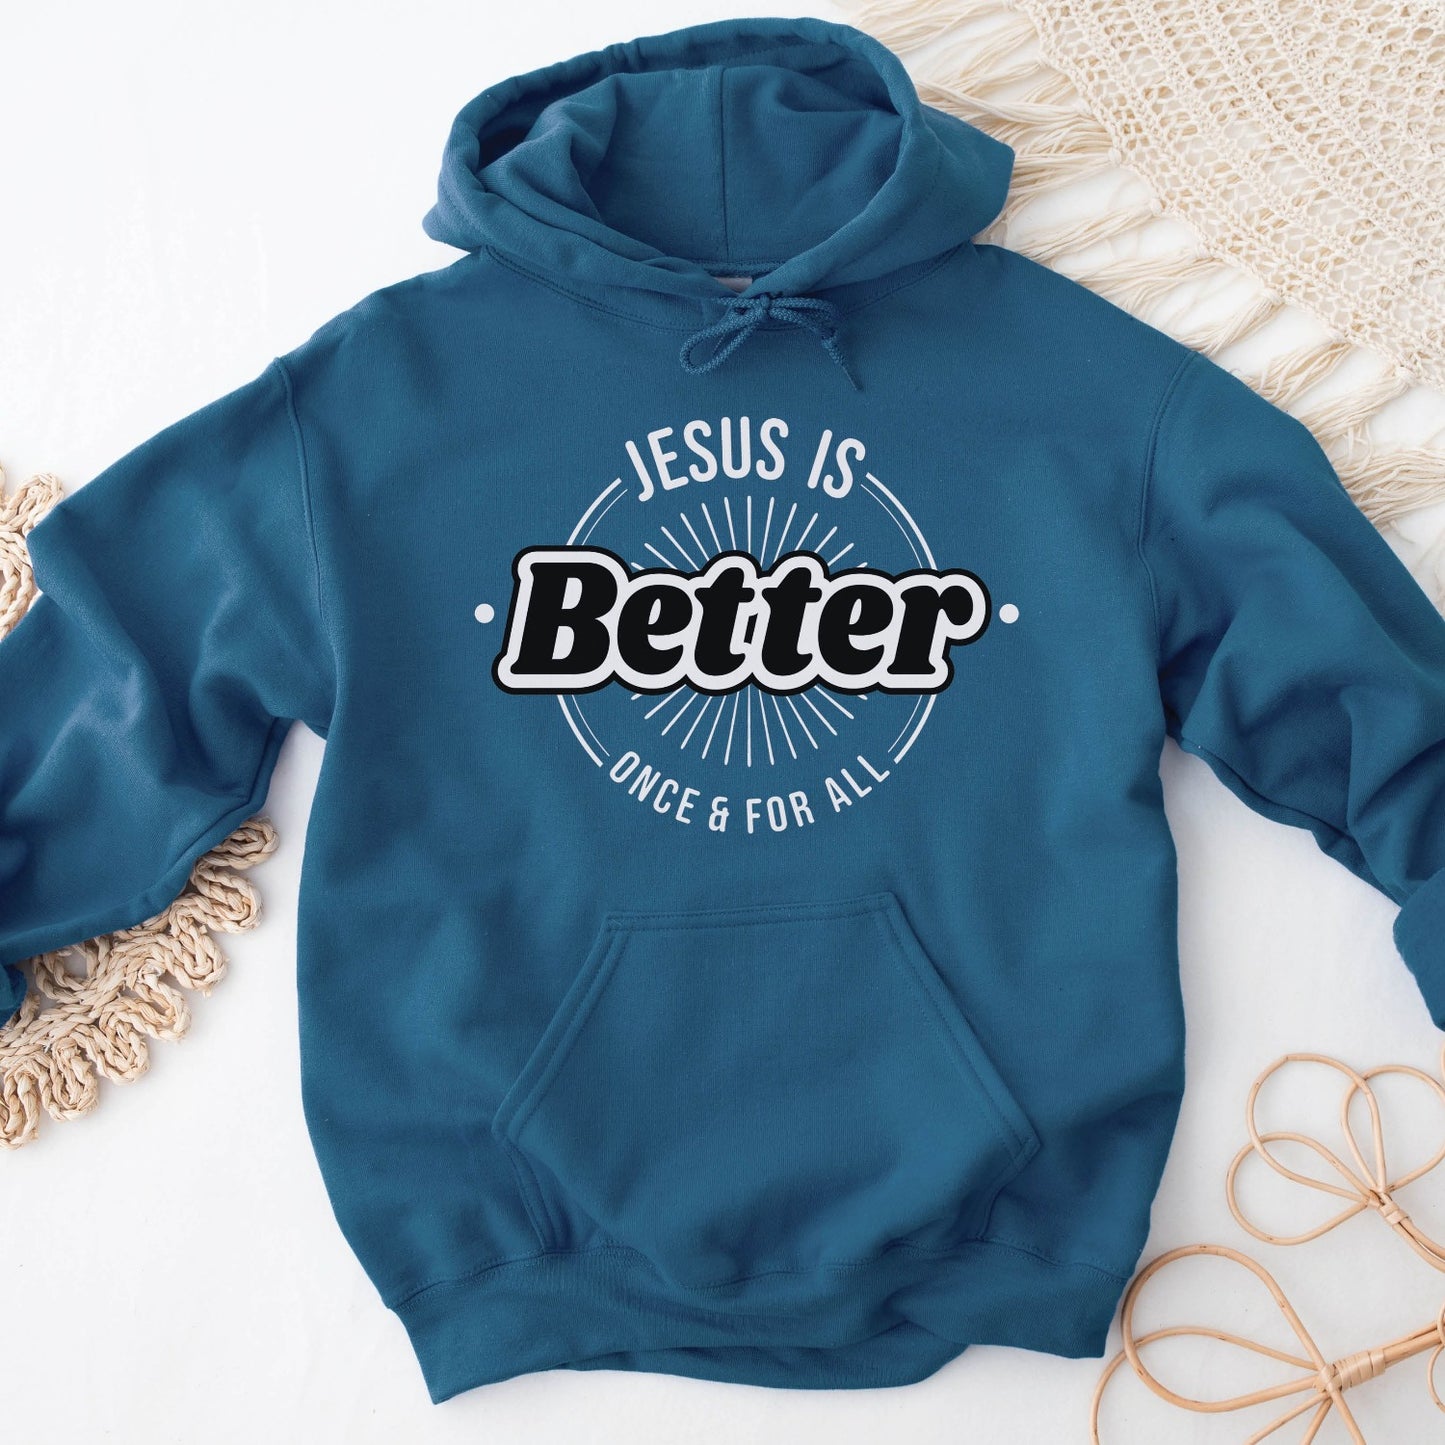 Indigo teal blue color faith-based oversized cozy hoodie sweatshirt with "Jesus is BETTER - Once and For All" logo style design in black and white, created for Christian men and women